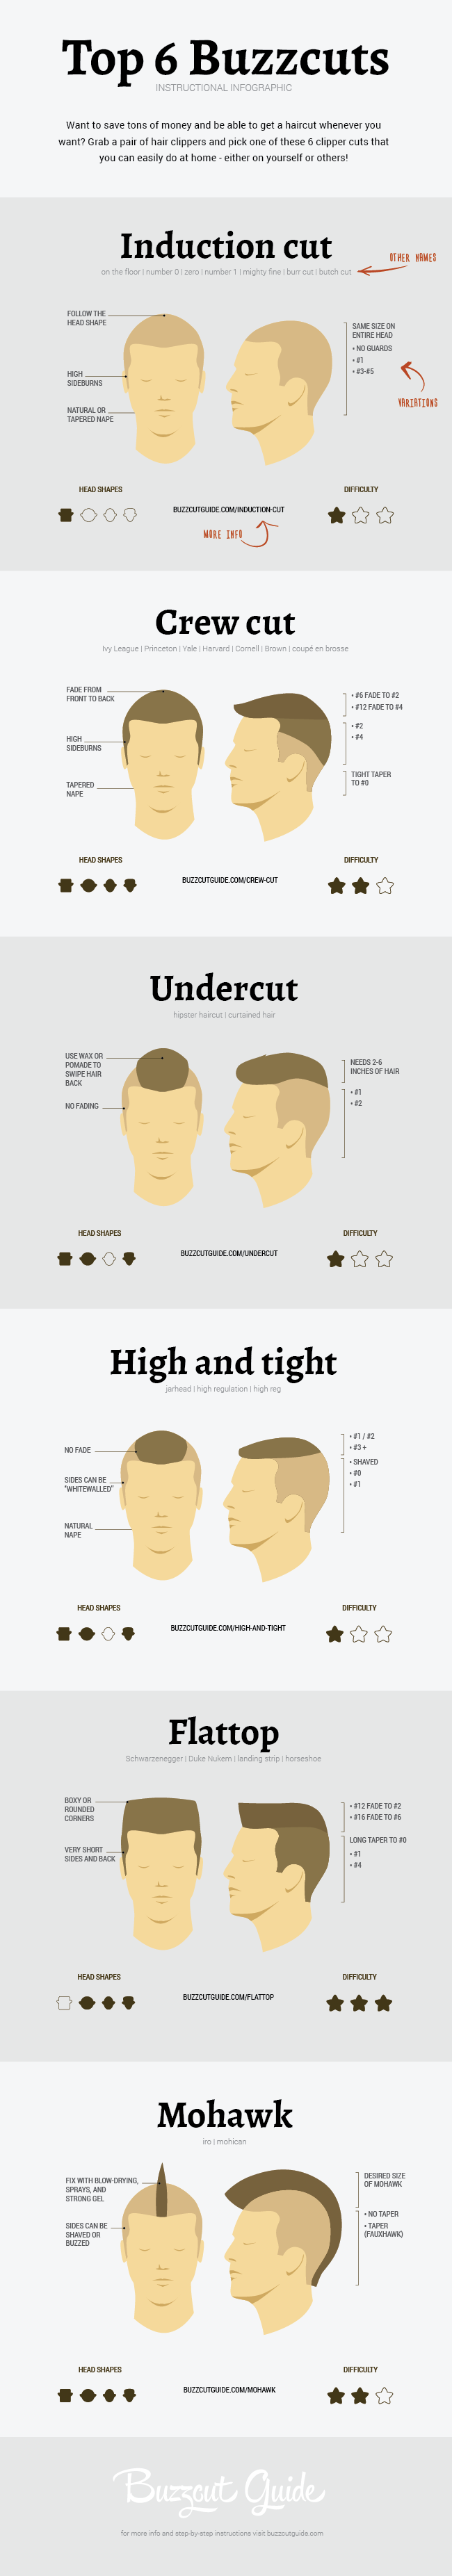 Infographic about clippercuts or buzzcuts